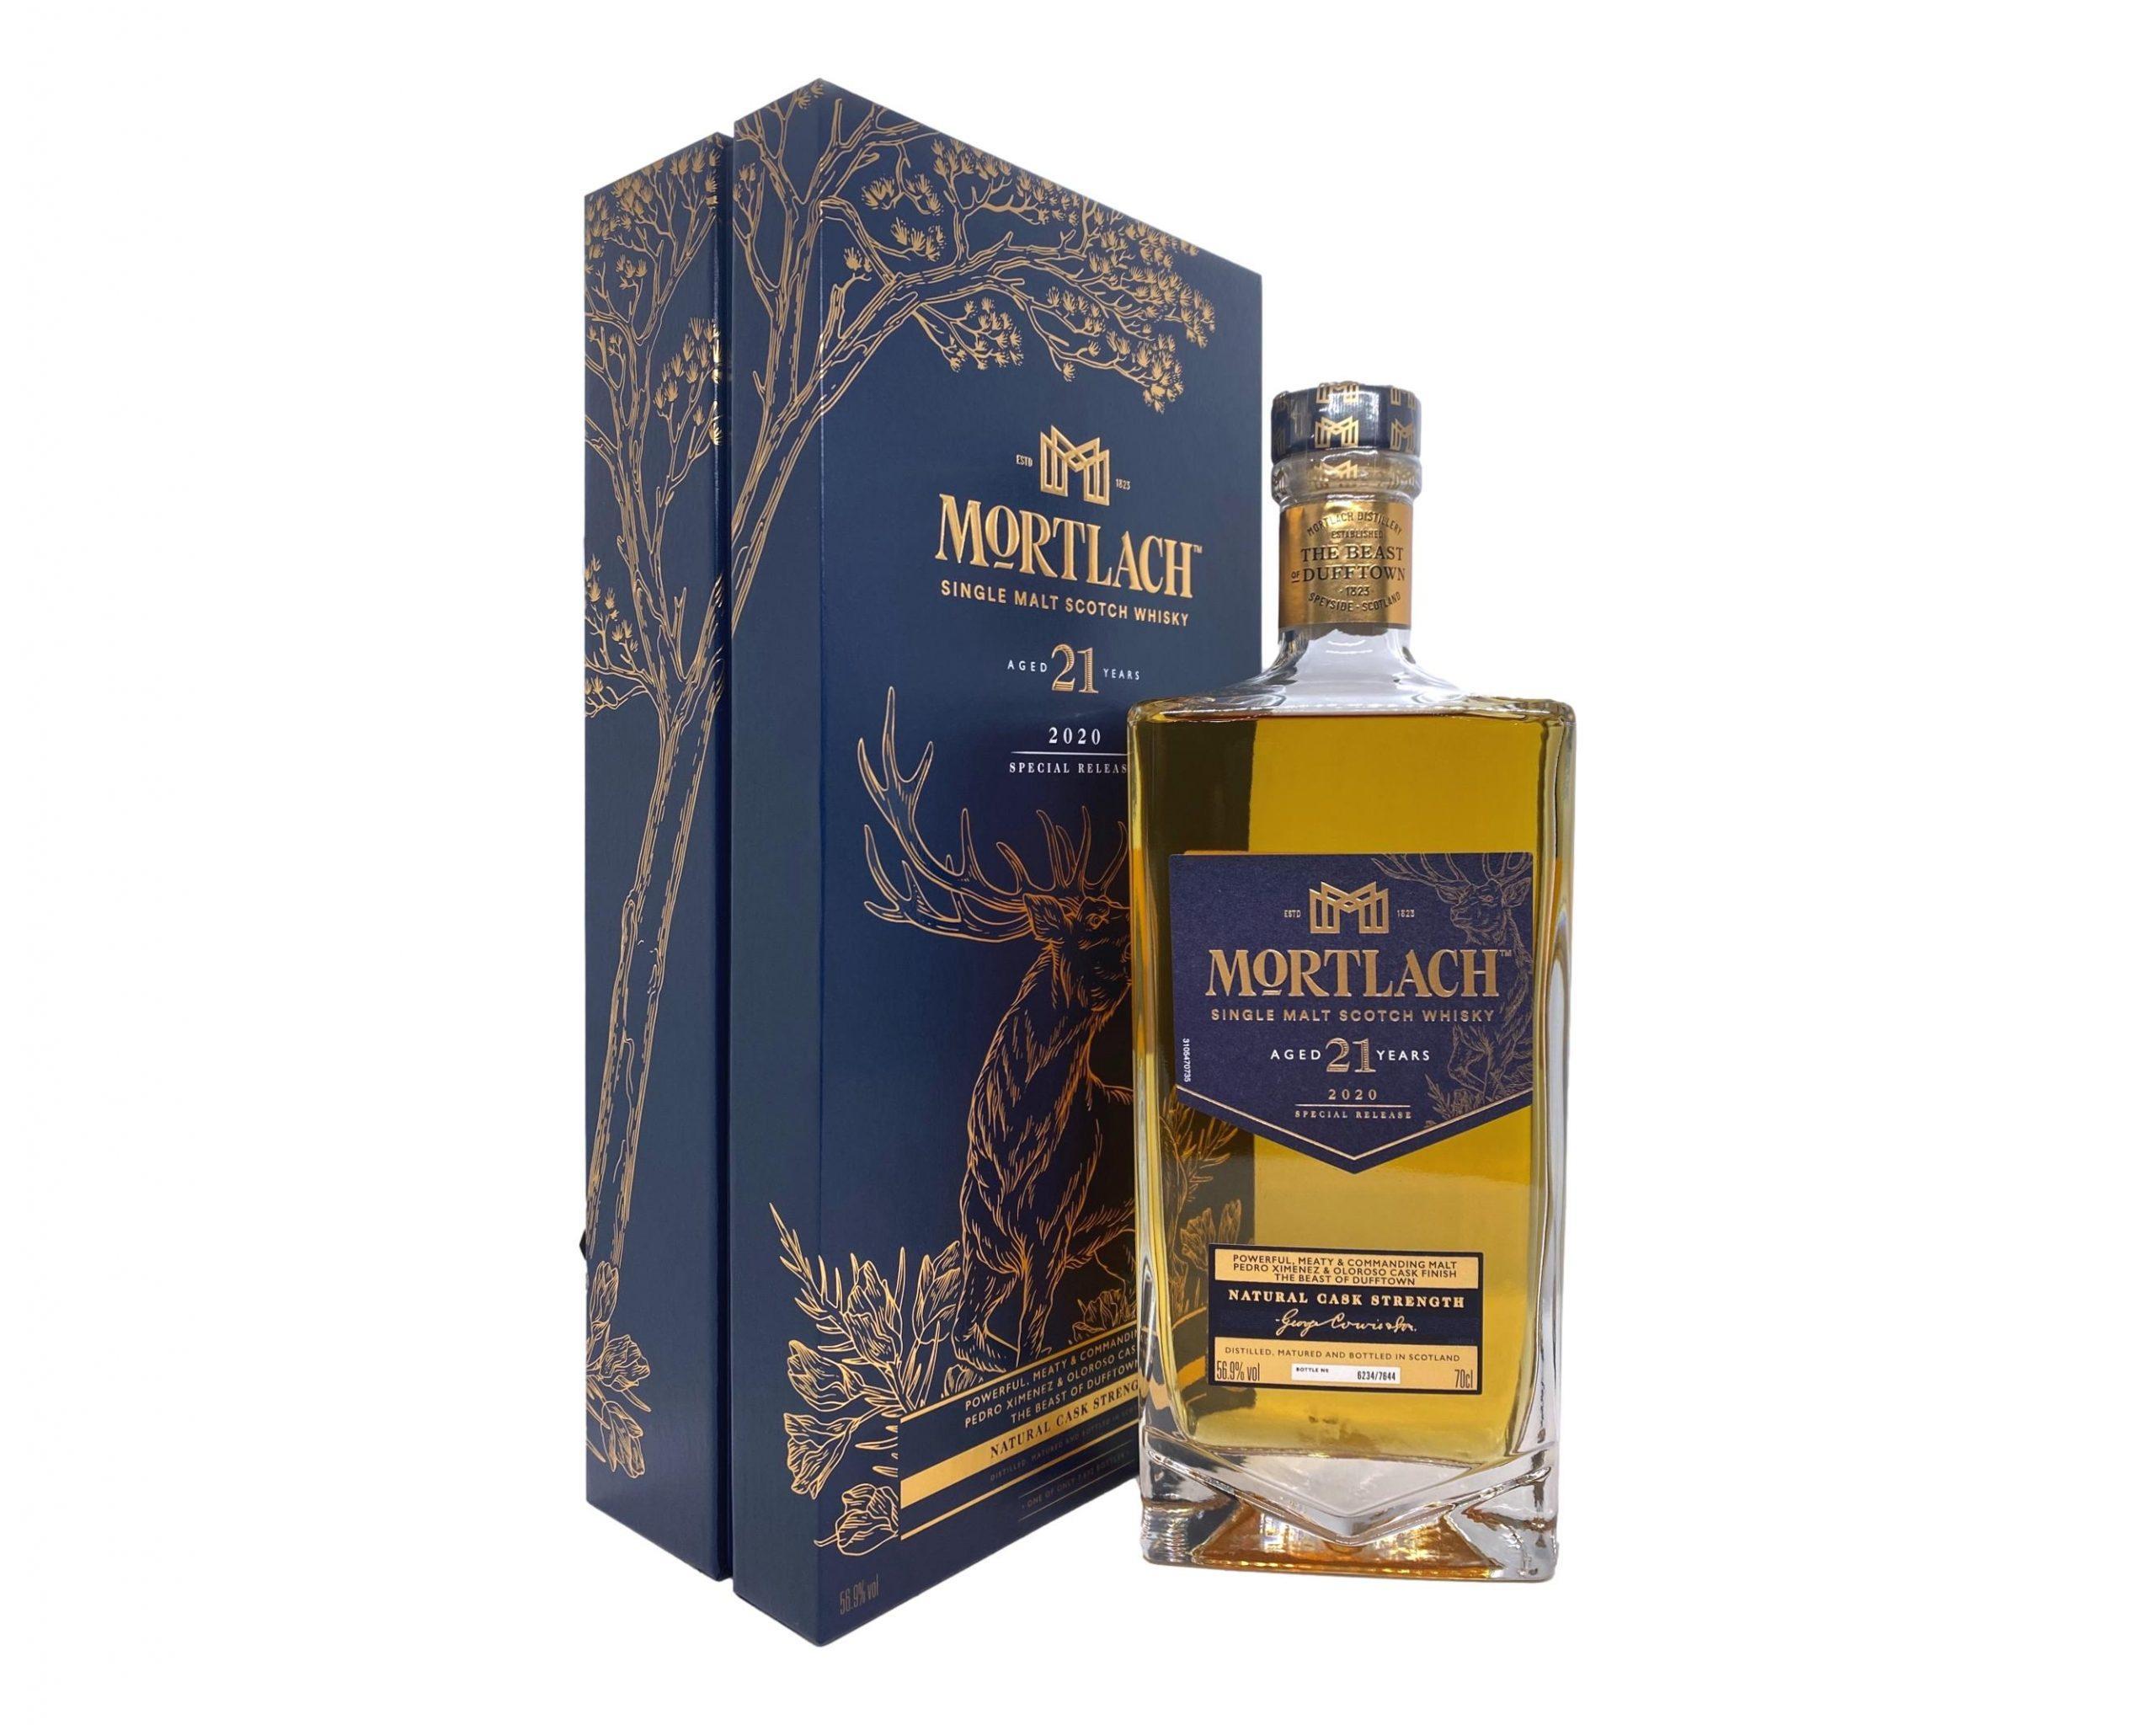 Mortlach 21 Year Old (Special Release 2020) Cask Strength Single Malt Scotch Whisky 700mL